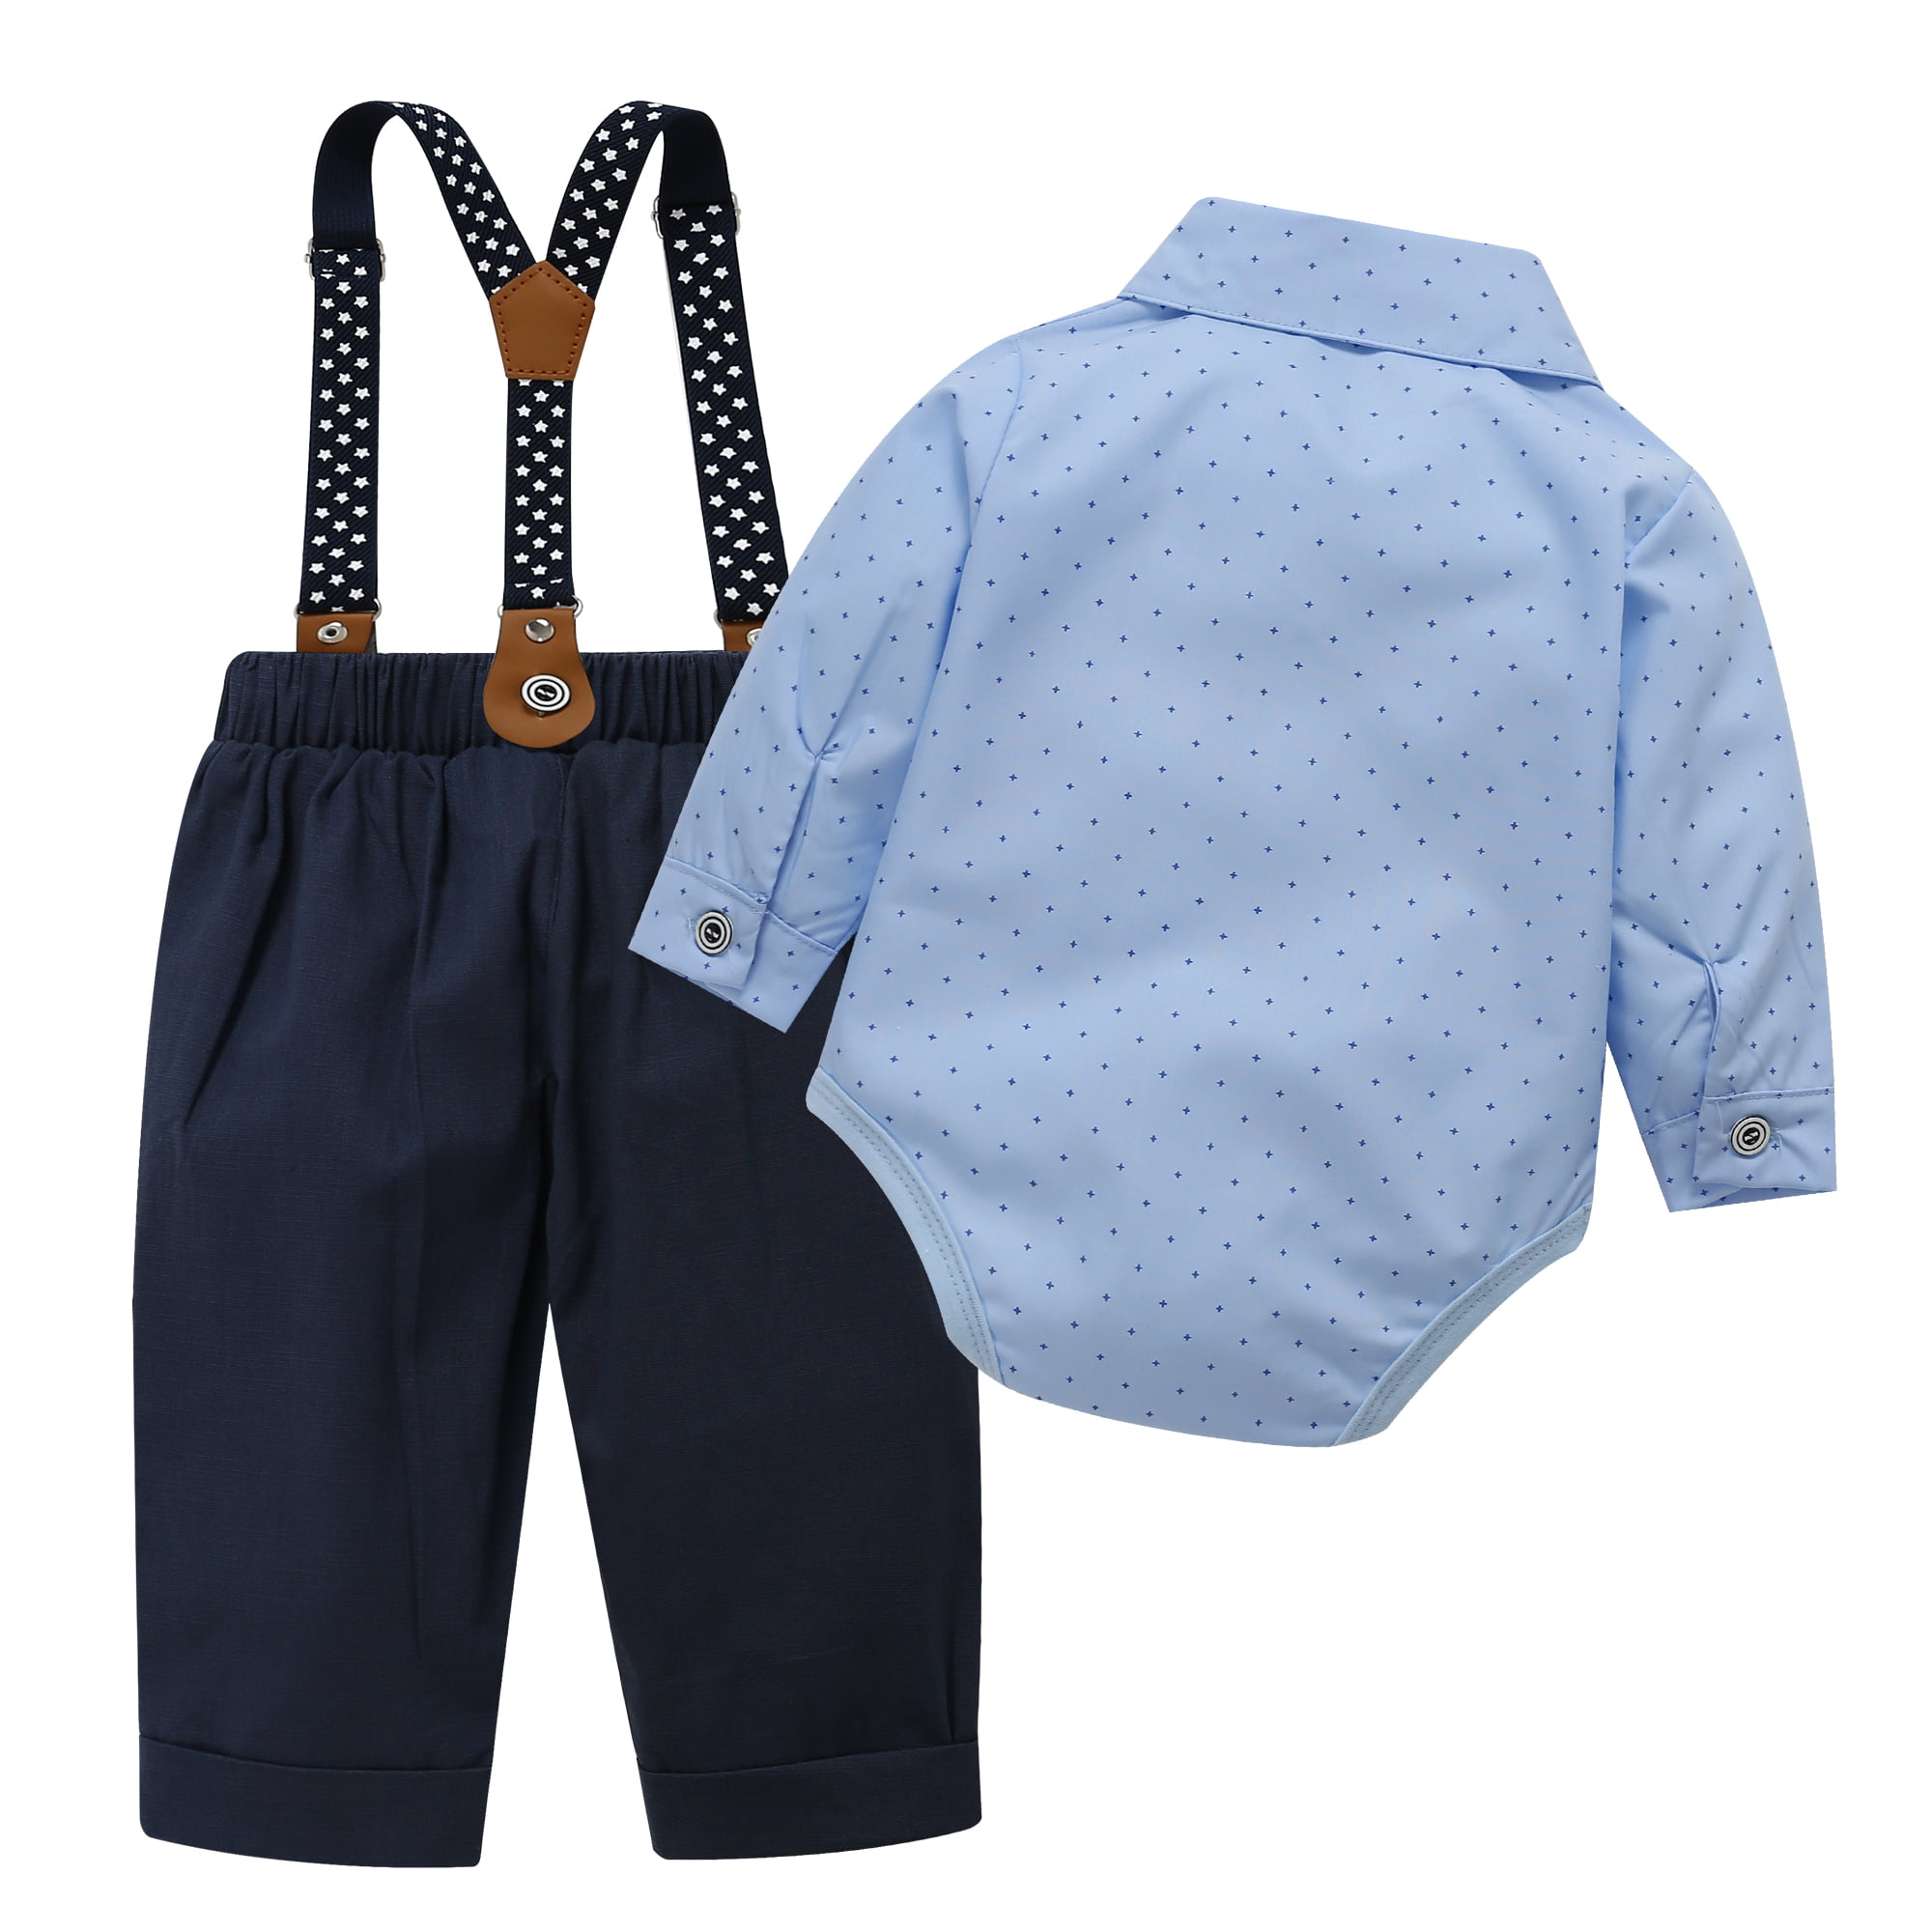 Edjude Baby Boys Gentlemen Outfits Suit Toddler Formal Shirt Shorts Suspenders Bowtie Romper Summer Clothing Set 